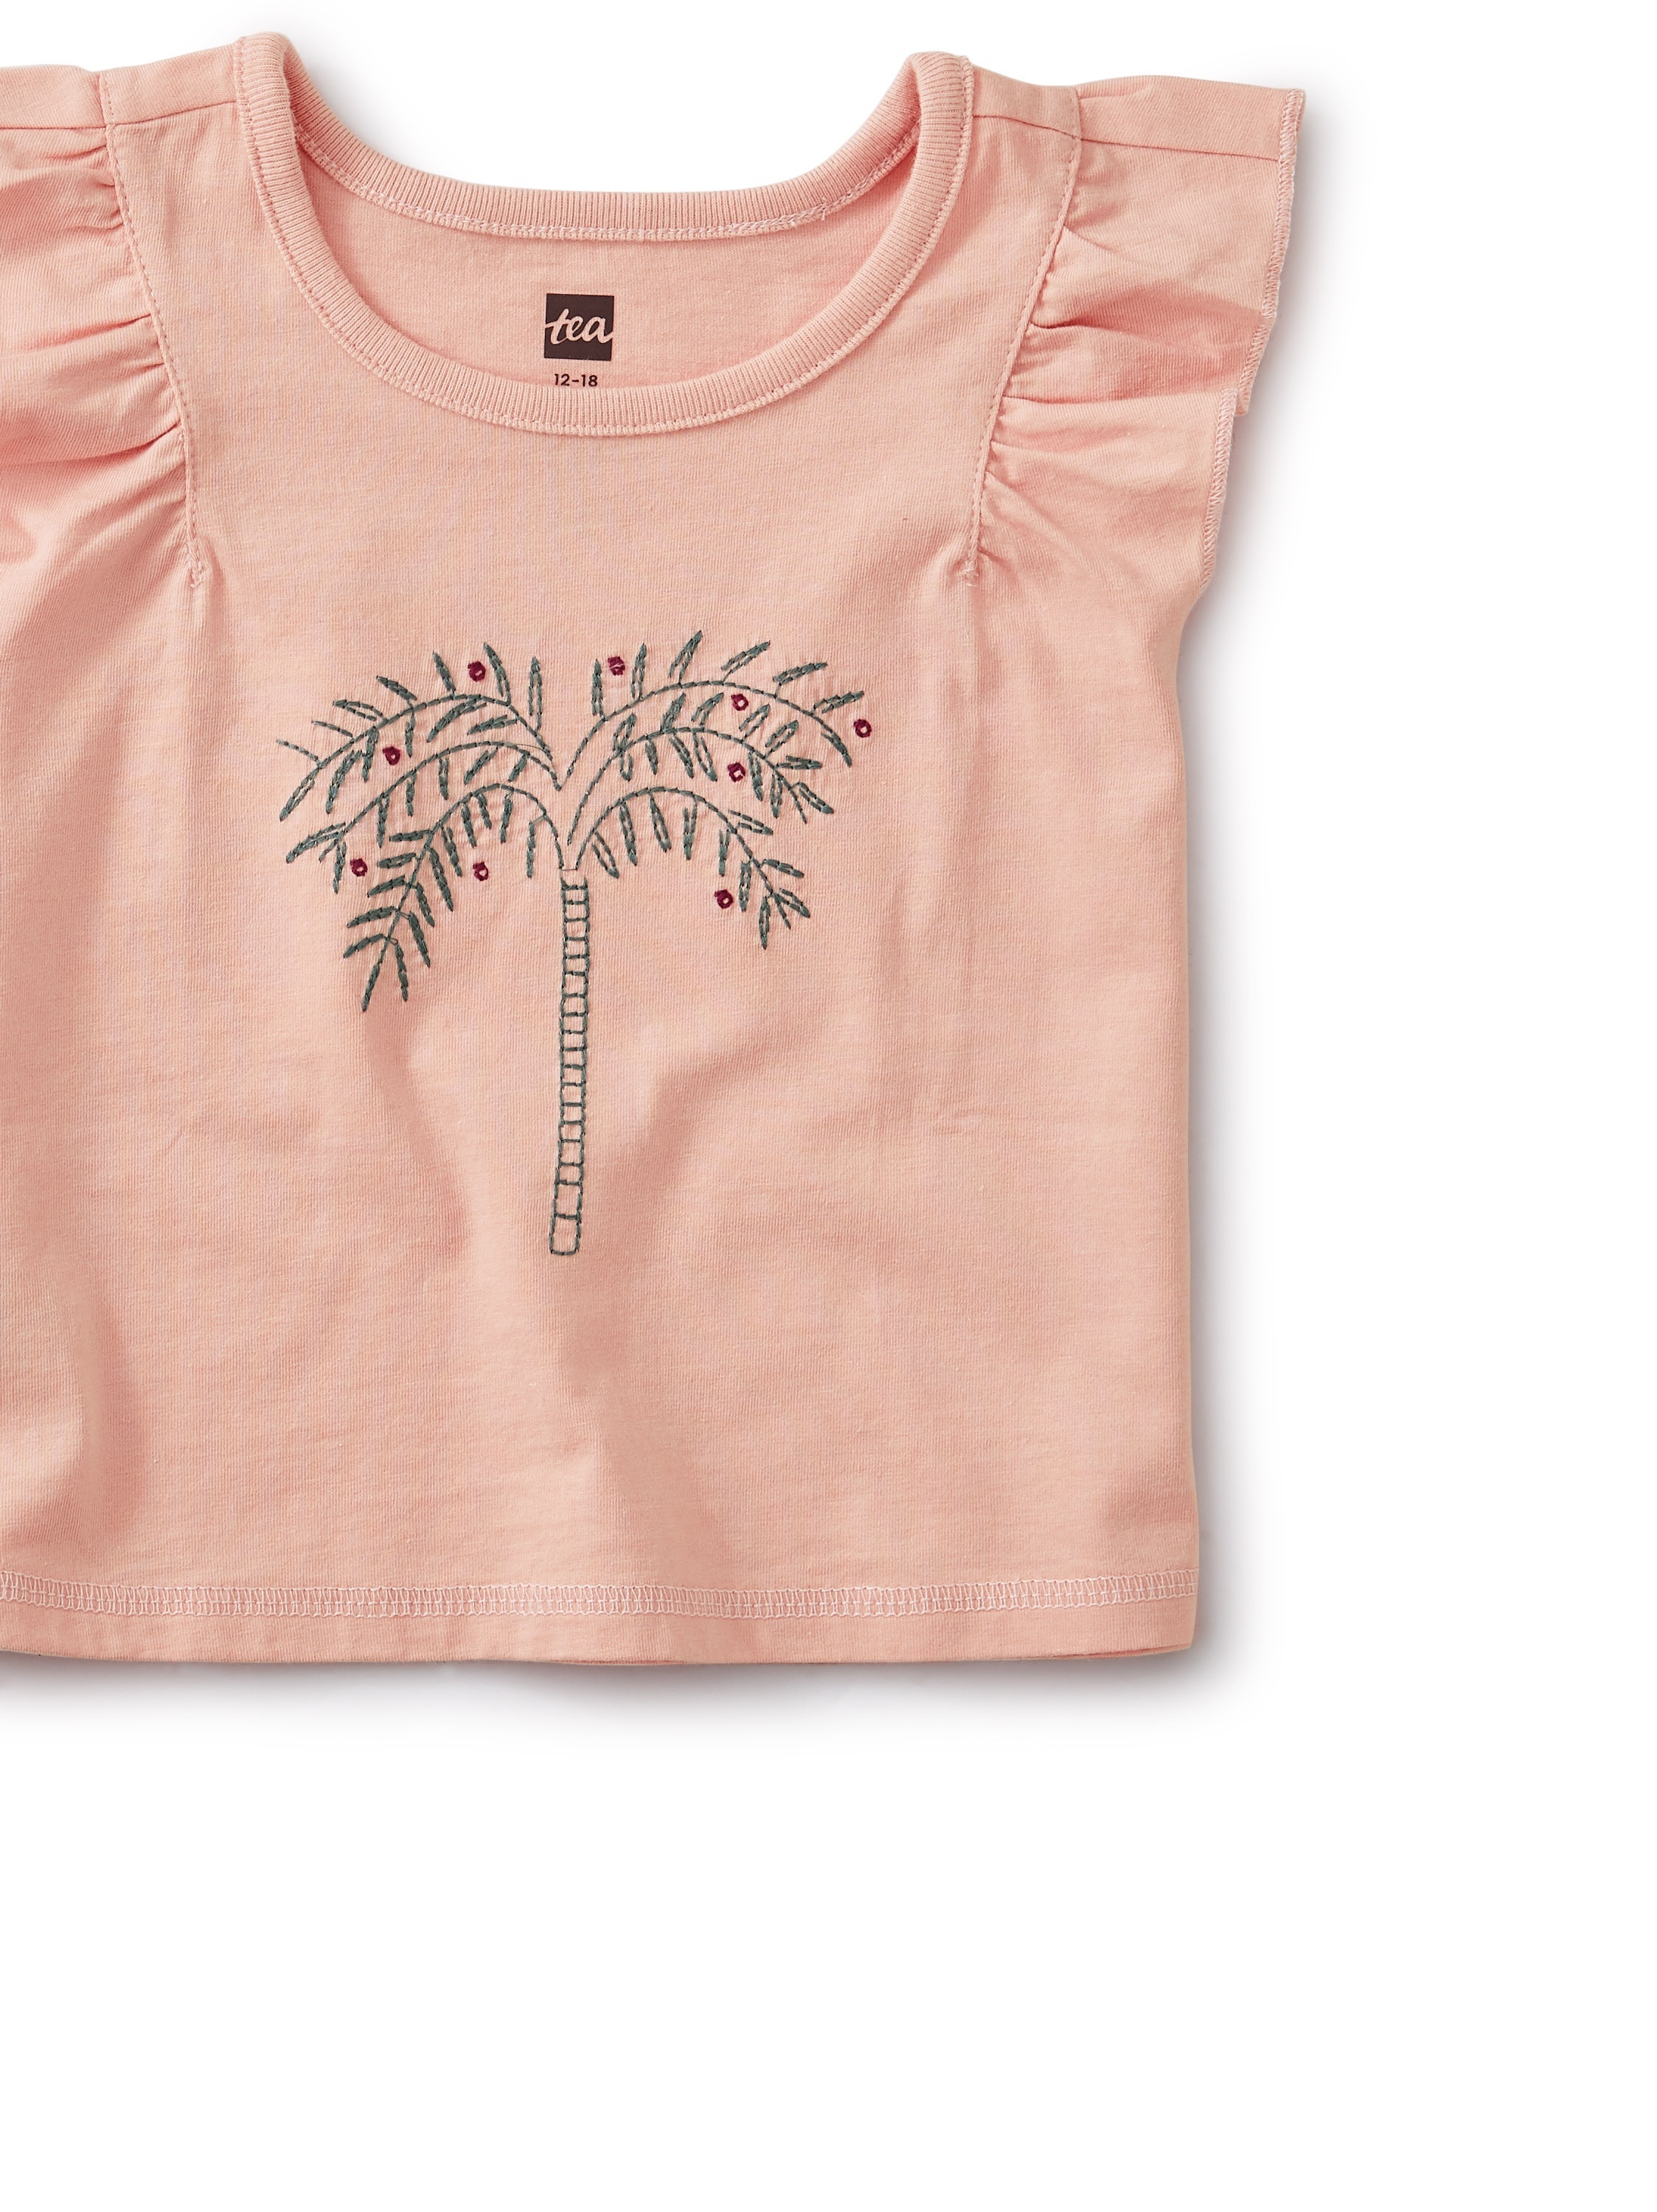 Embroidered Palm Flutter Tee | Tea Collection